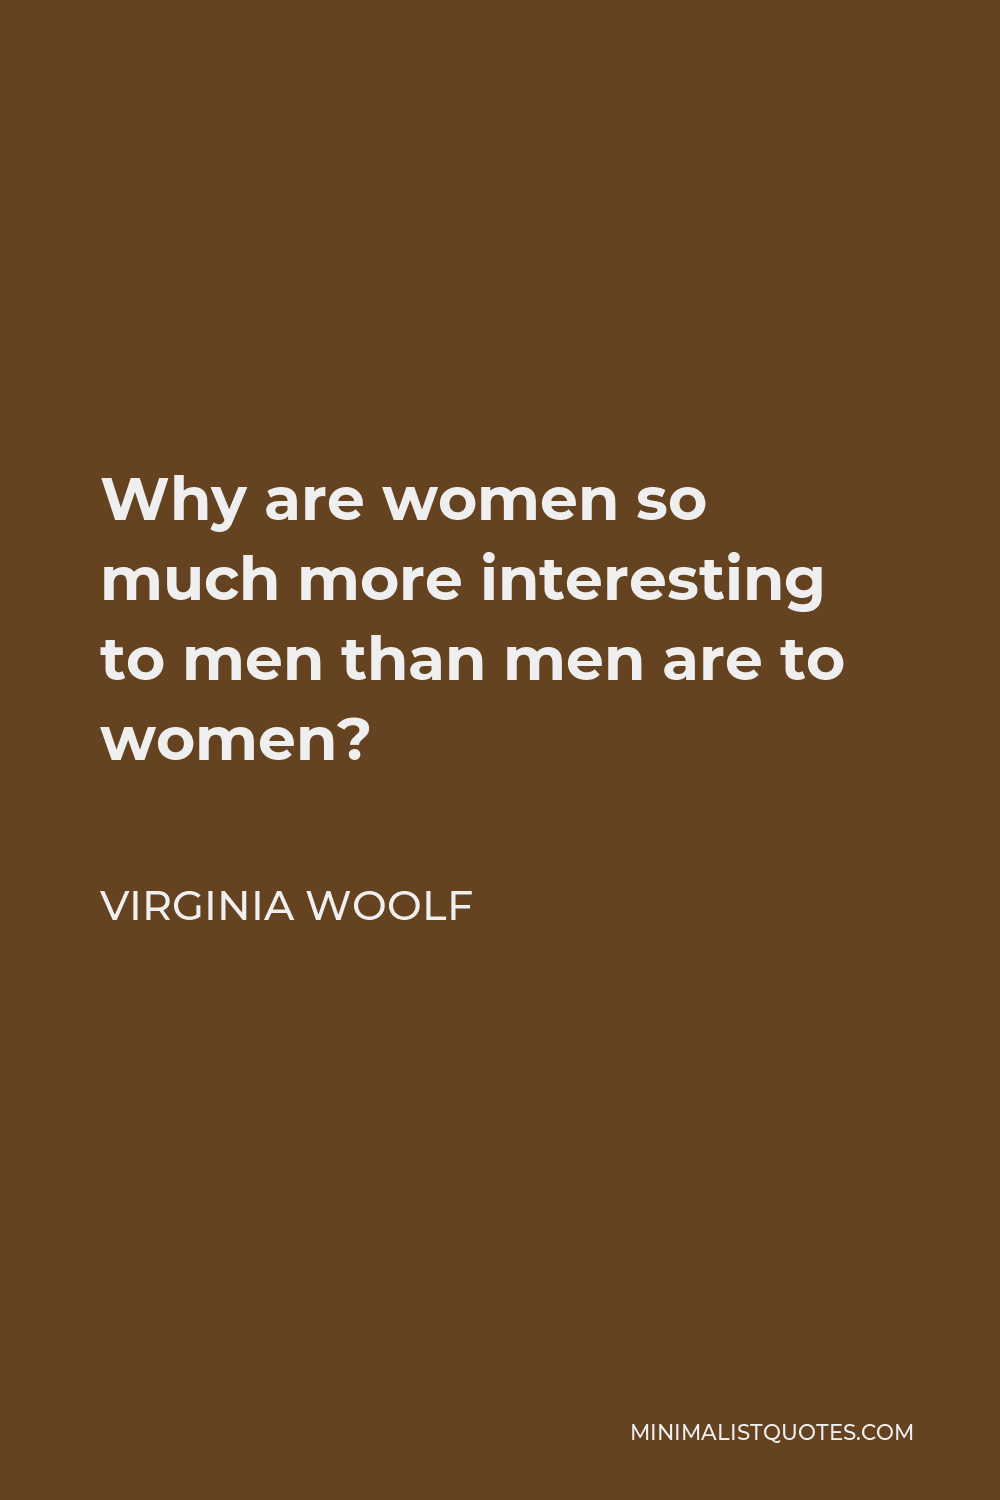 Virginia Woolf Quote - Why are women so much more interesting to men than men are to women?